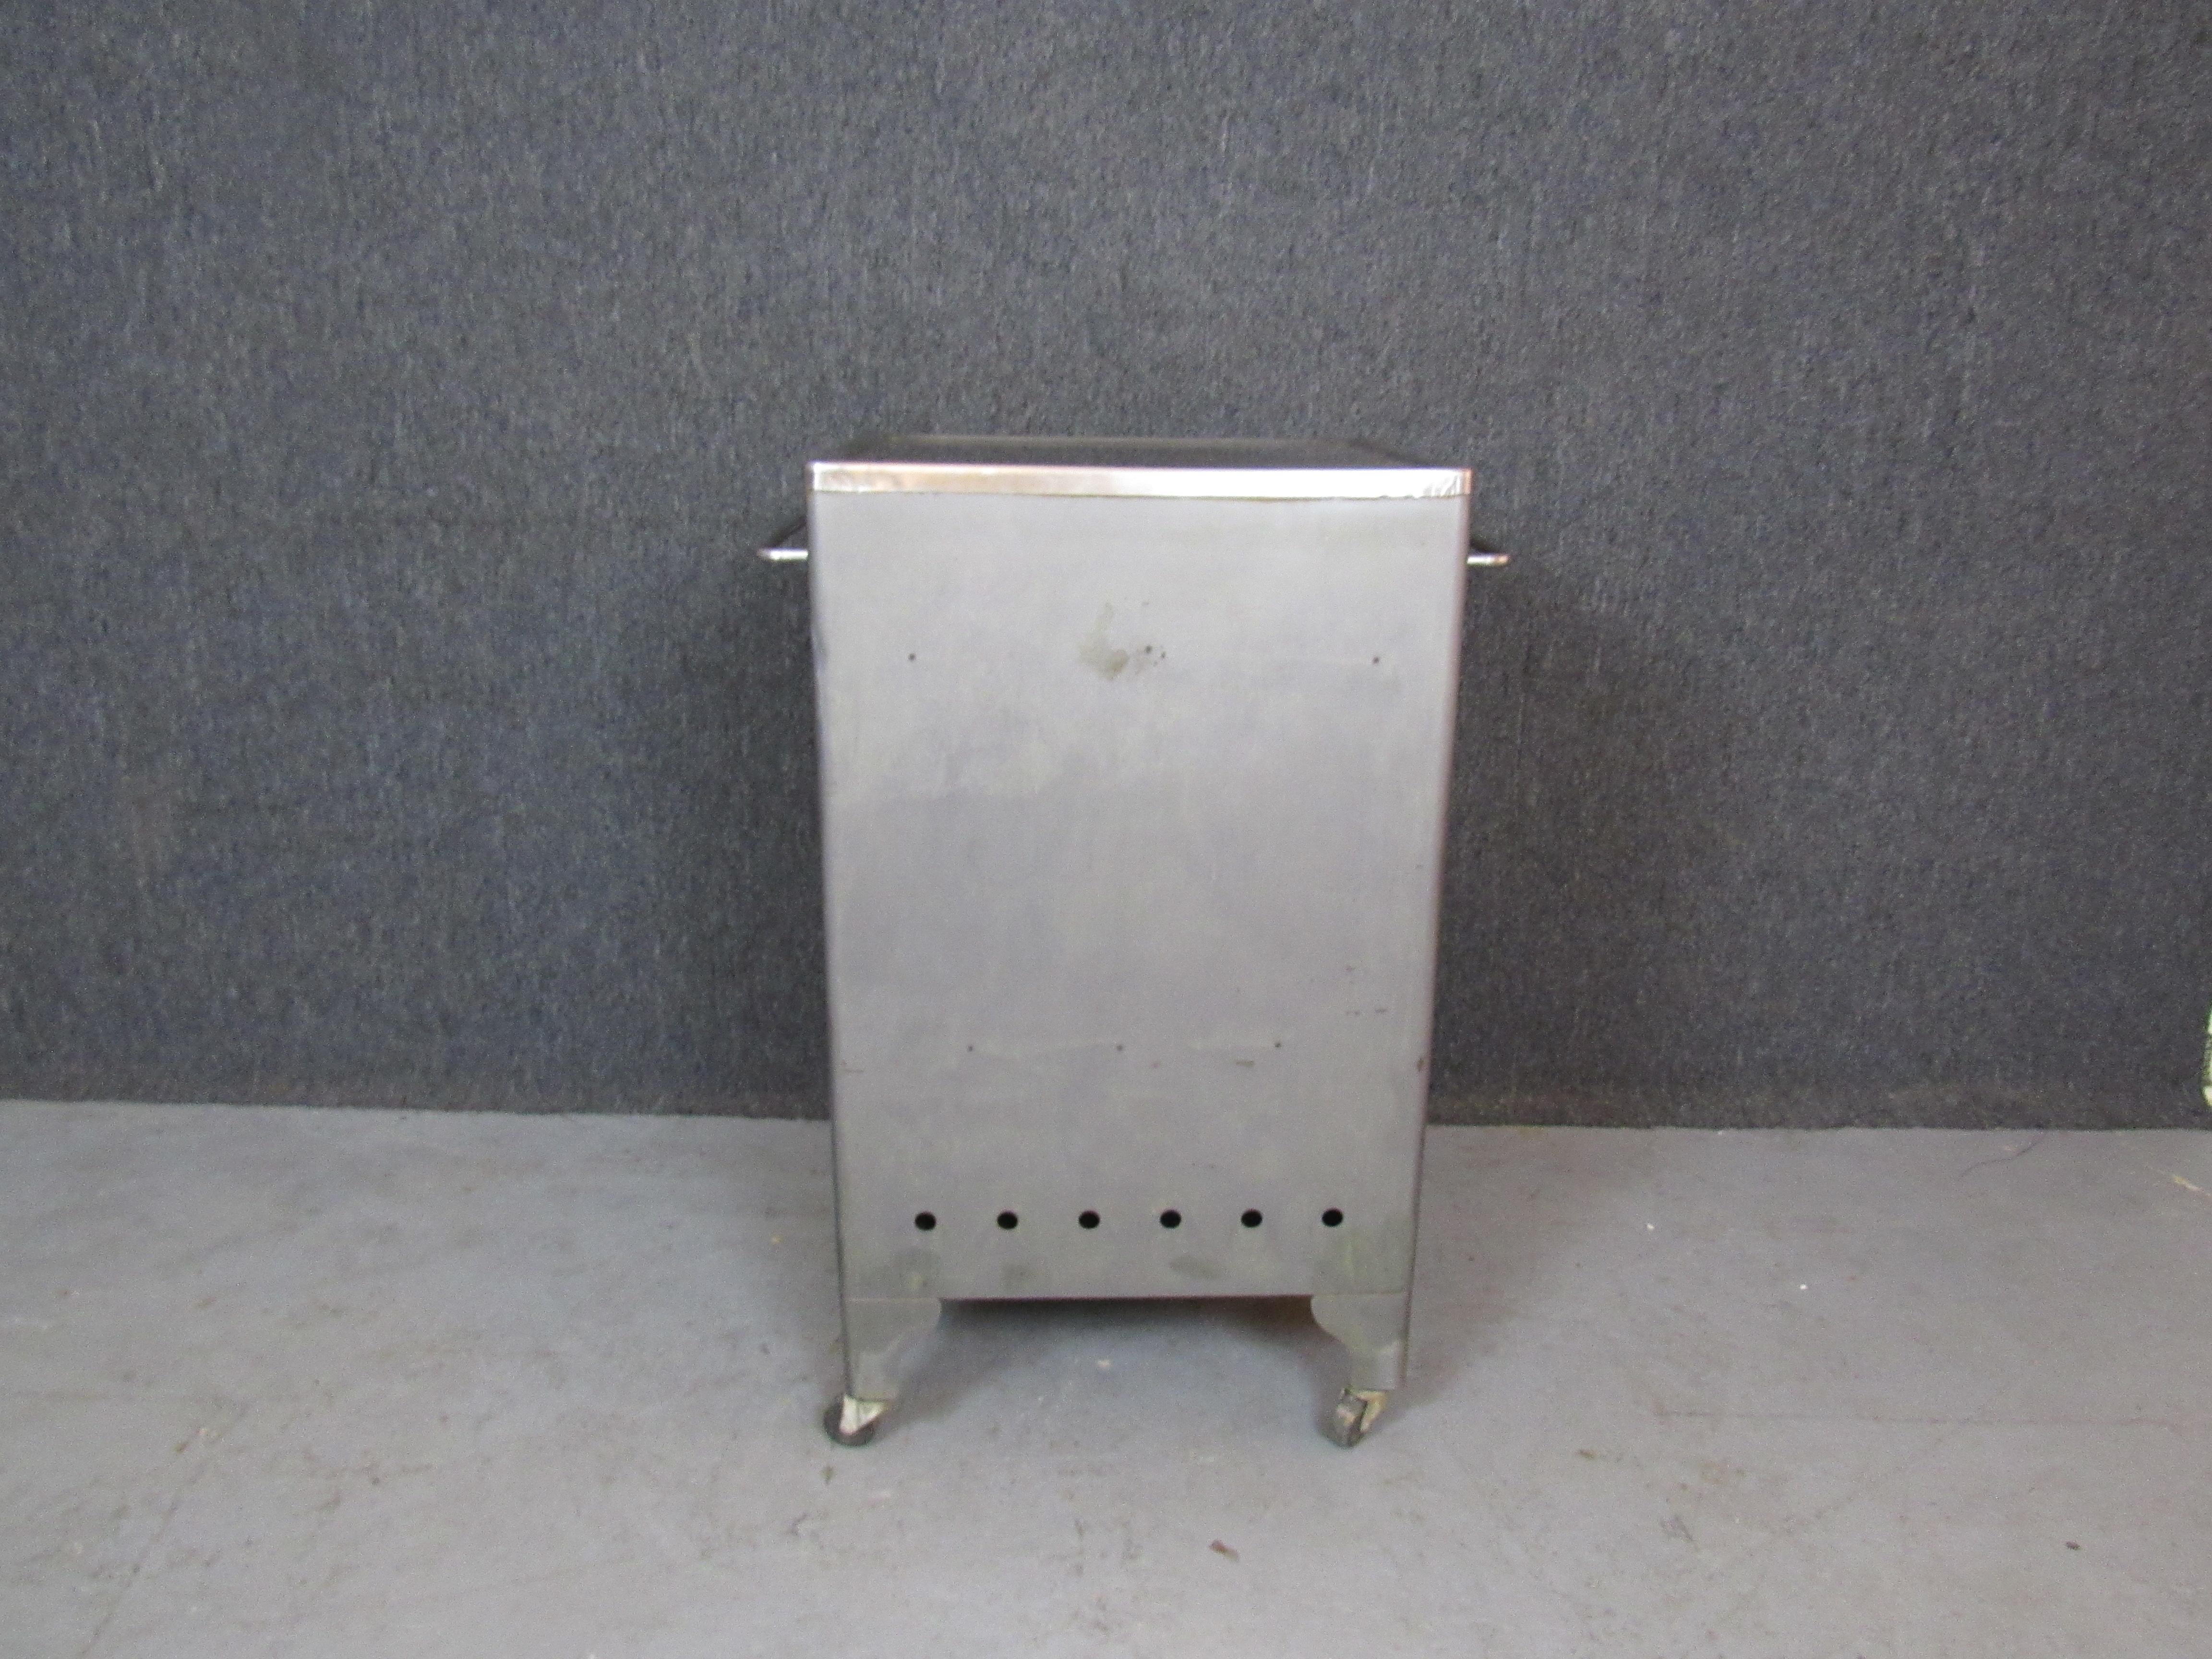 Welded Industrial Metal Rolling Cabinet by F.P.I. (Unicor)